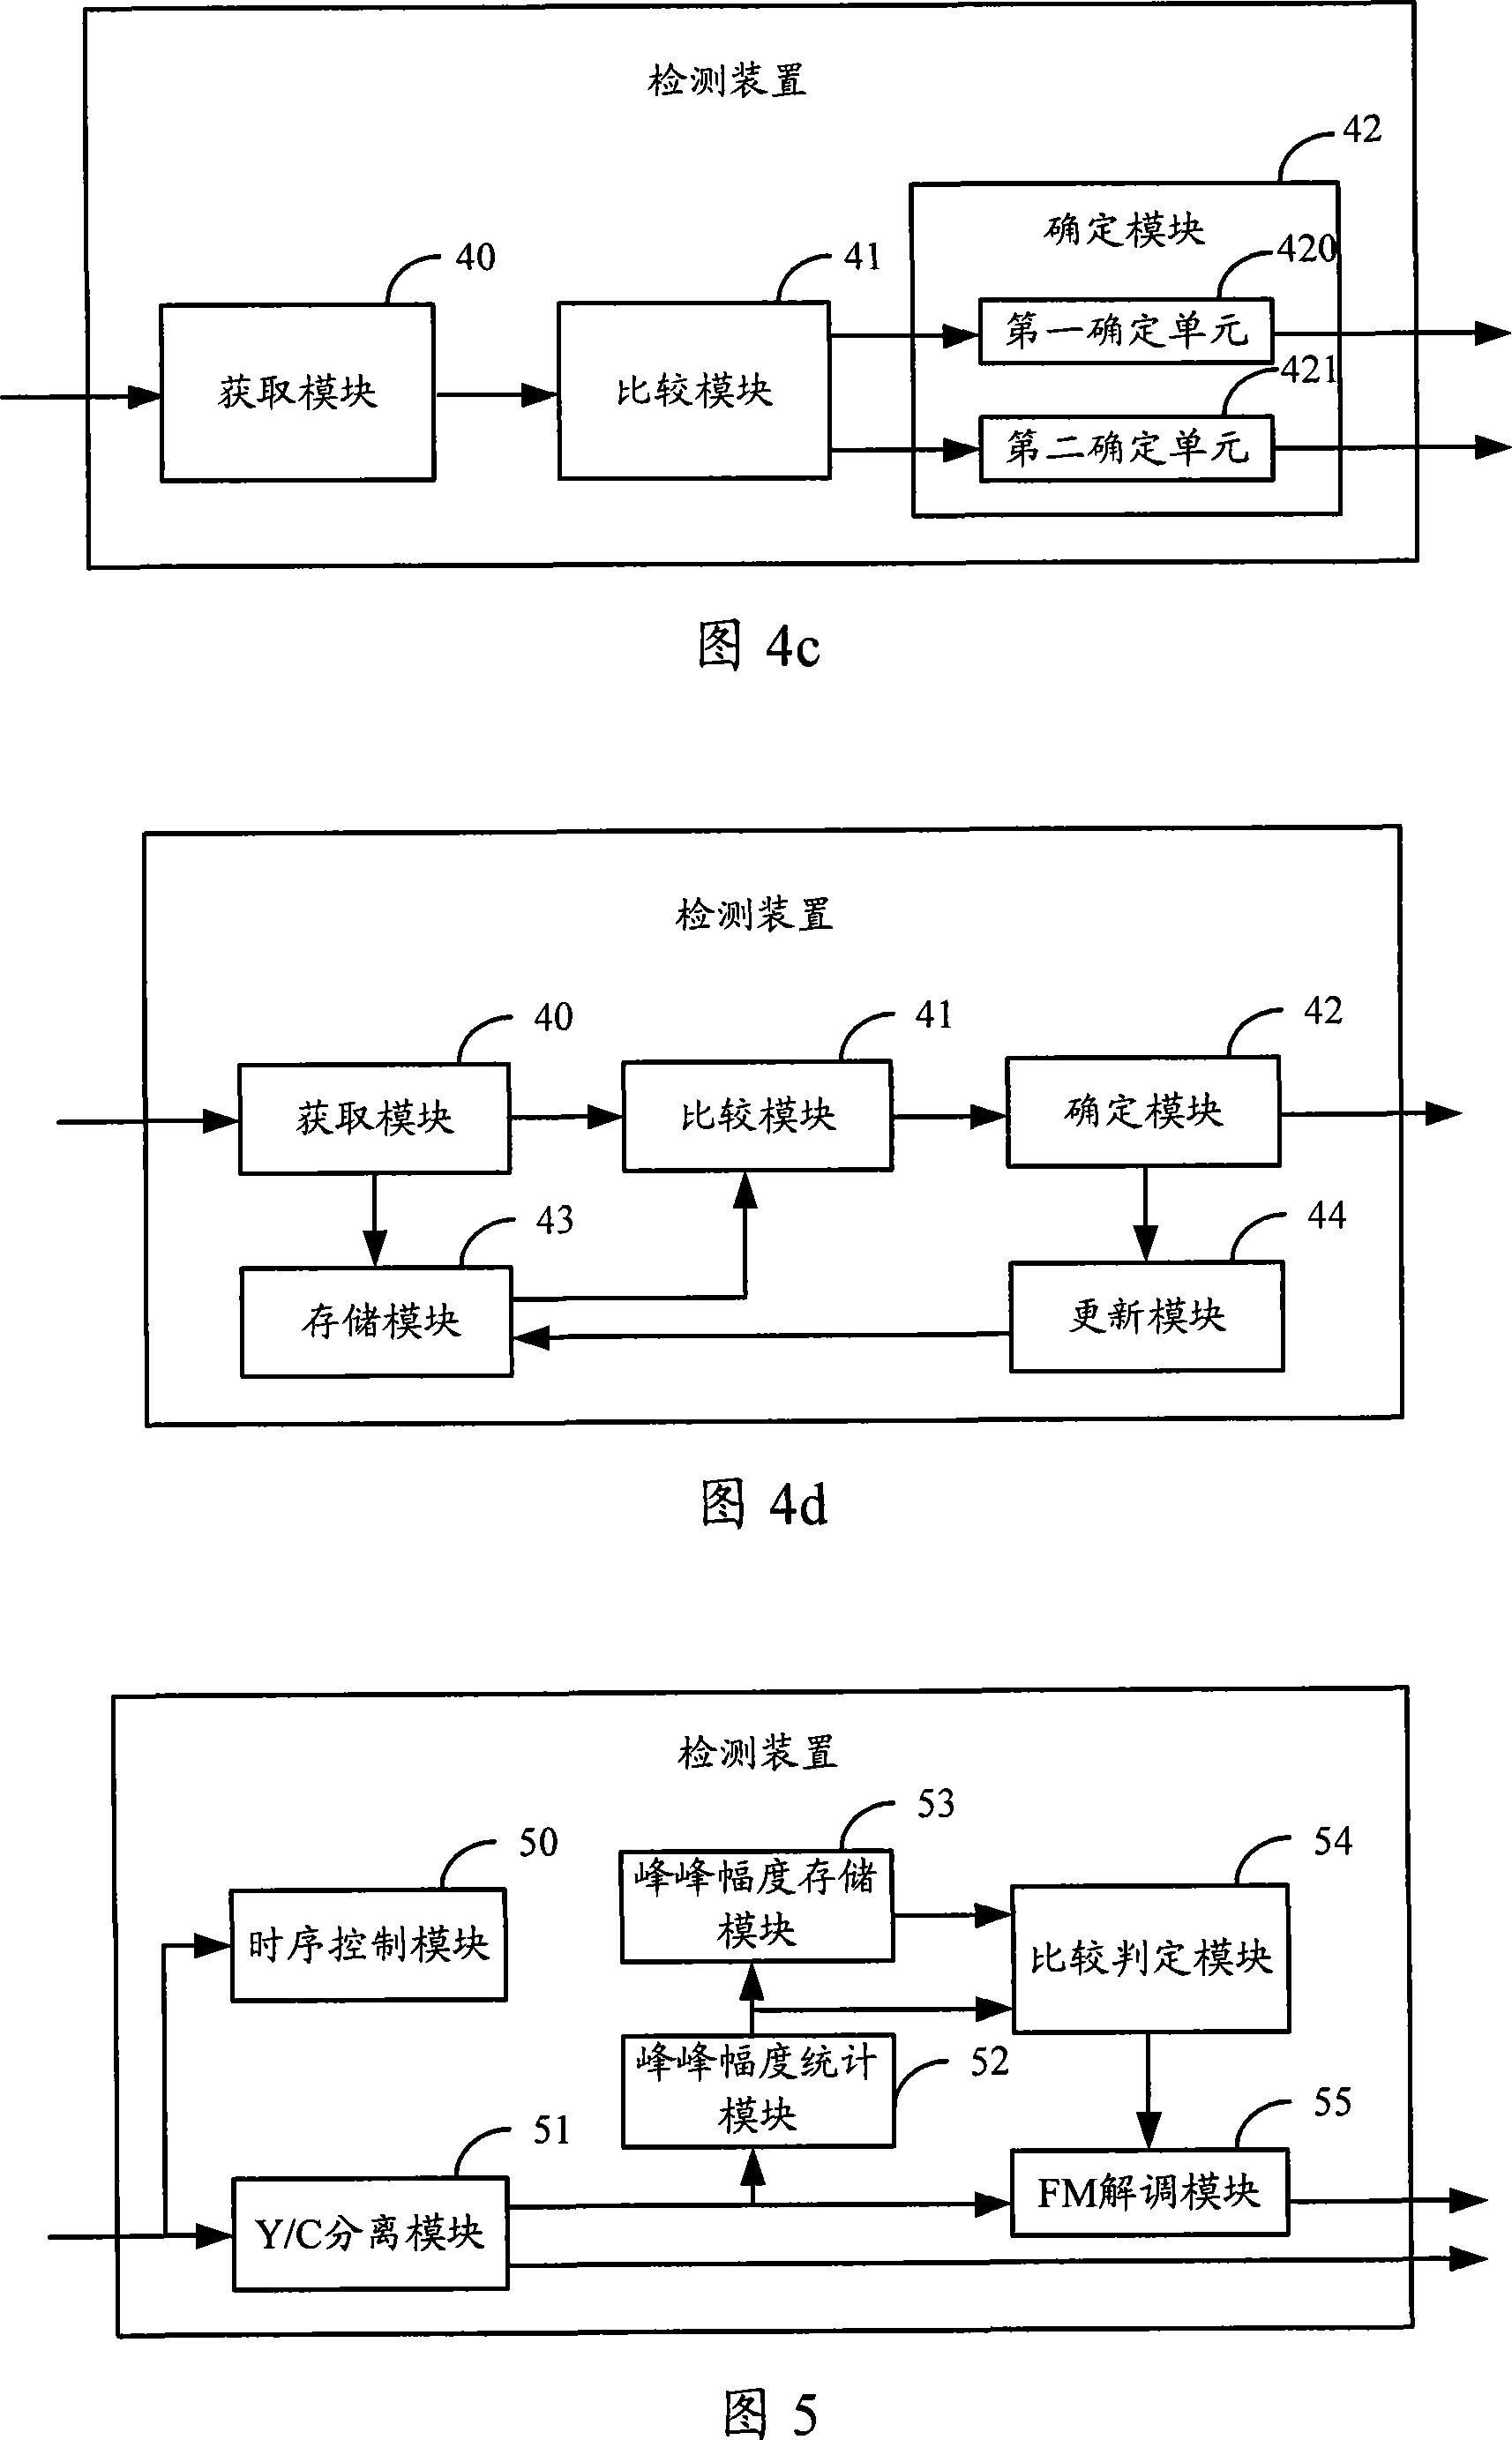 Detection method and device of SECAM video signal subcarrier type